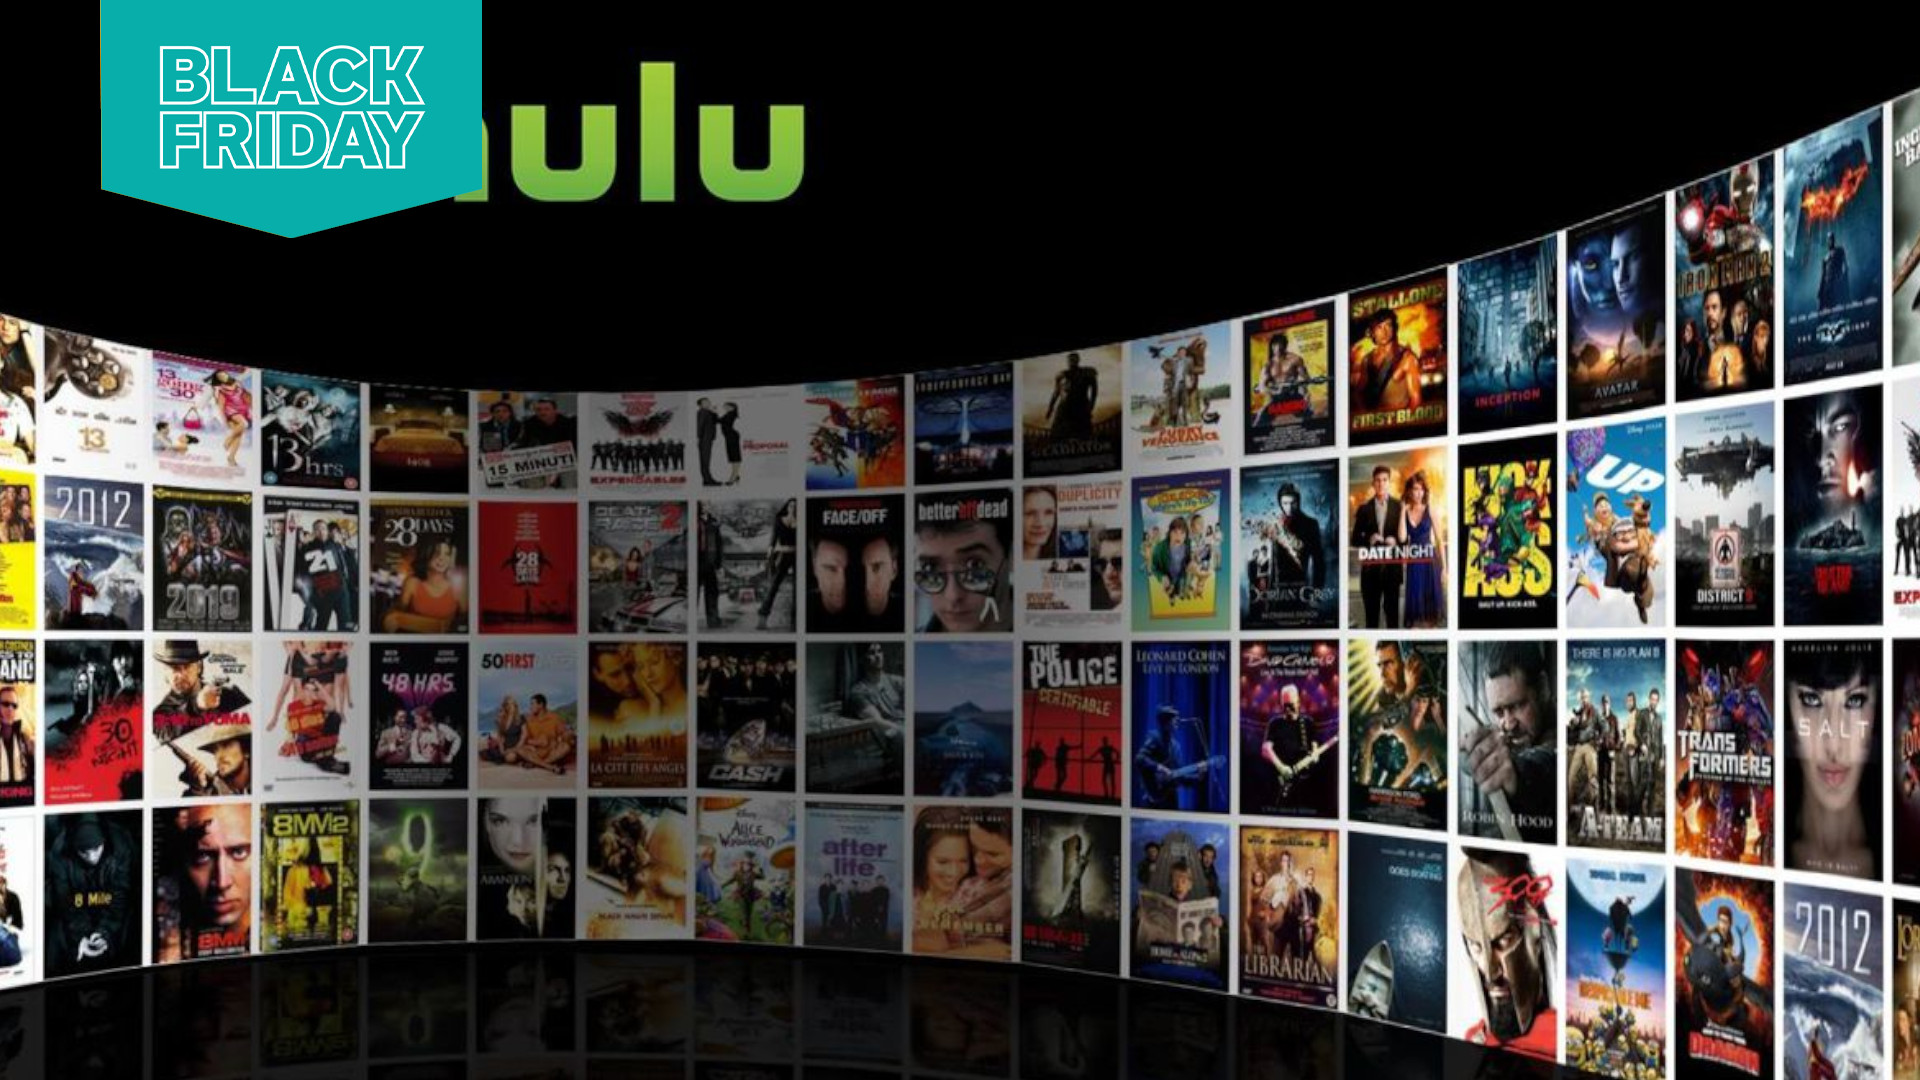 Hulu Black Friday deal gets you one year’s streaming for less than 1 a